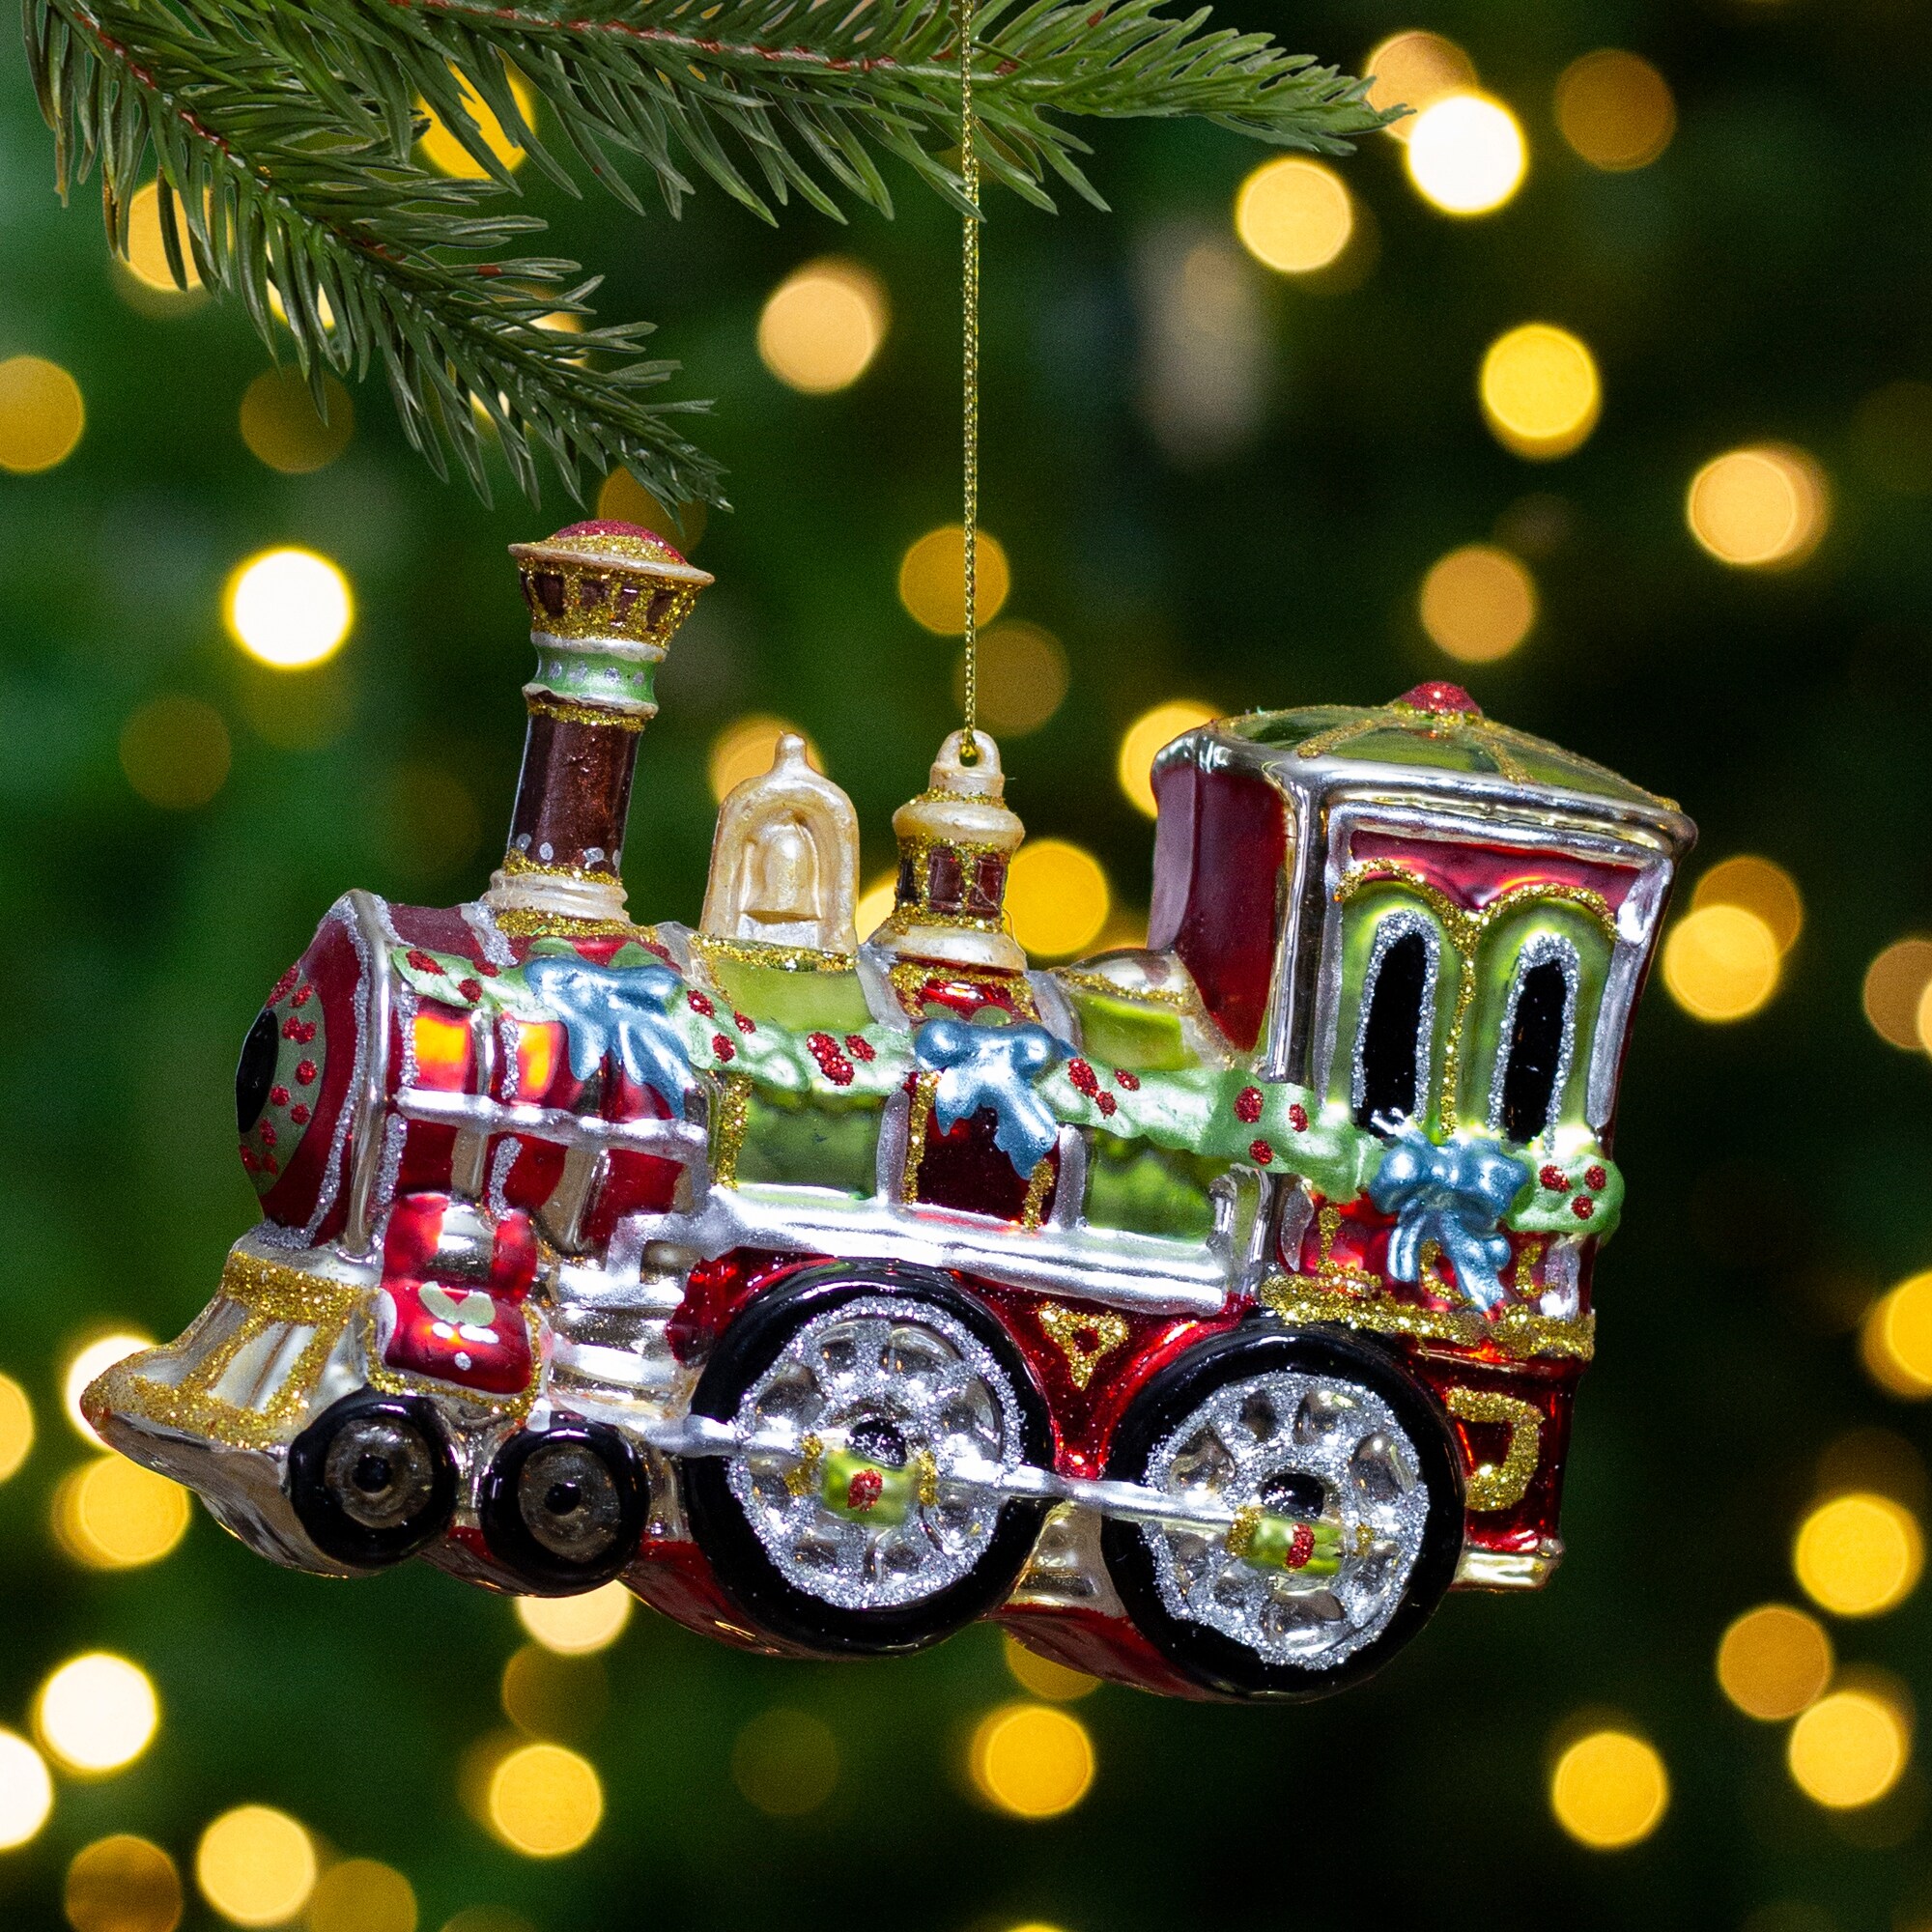 Iridescent Shimmer Hanging Train Christmas Tree Decorations, Magical Fairy  Tale Theme Pearlescent Steam Railway Train Locomotive 